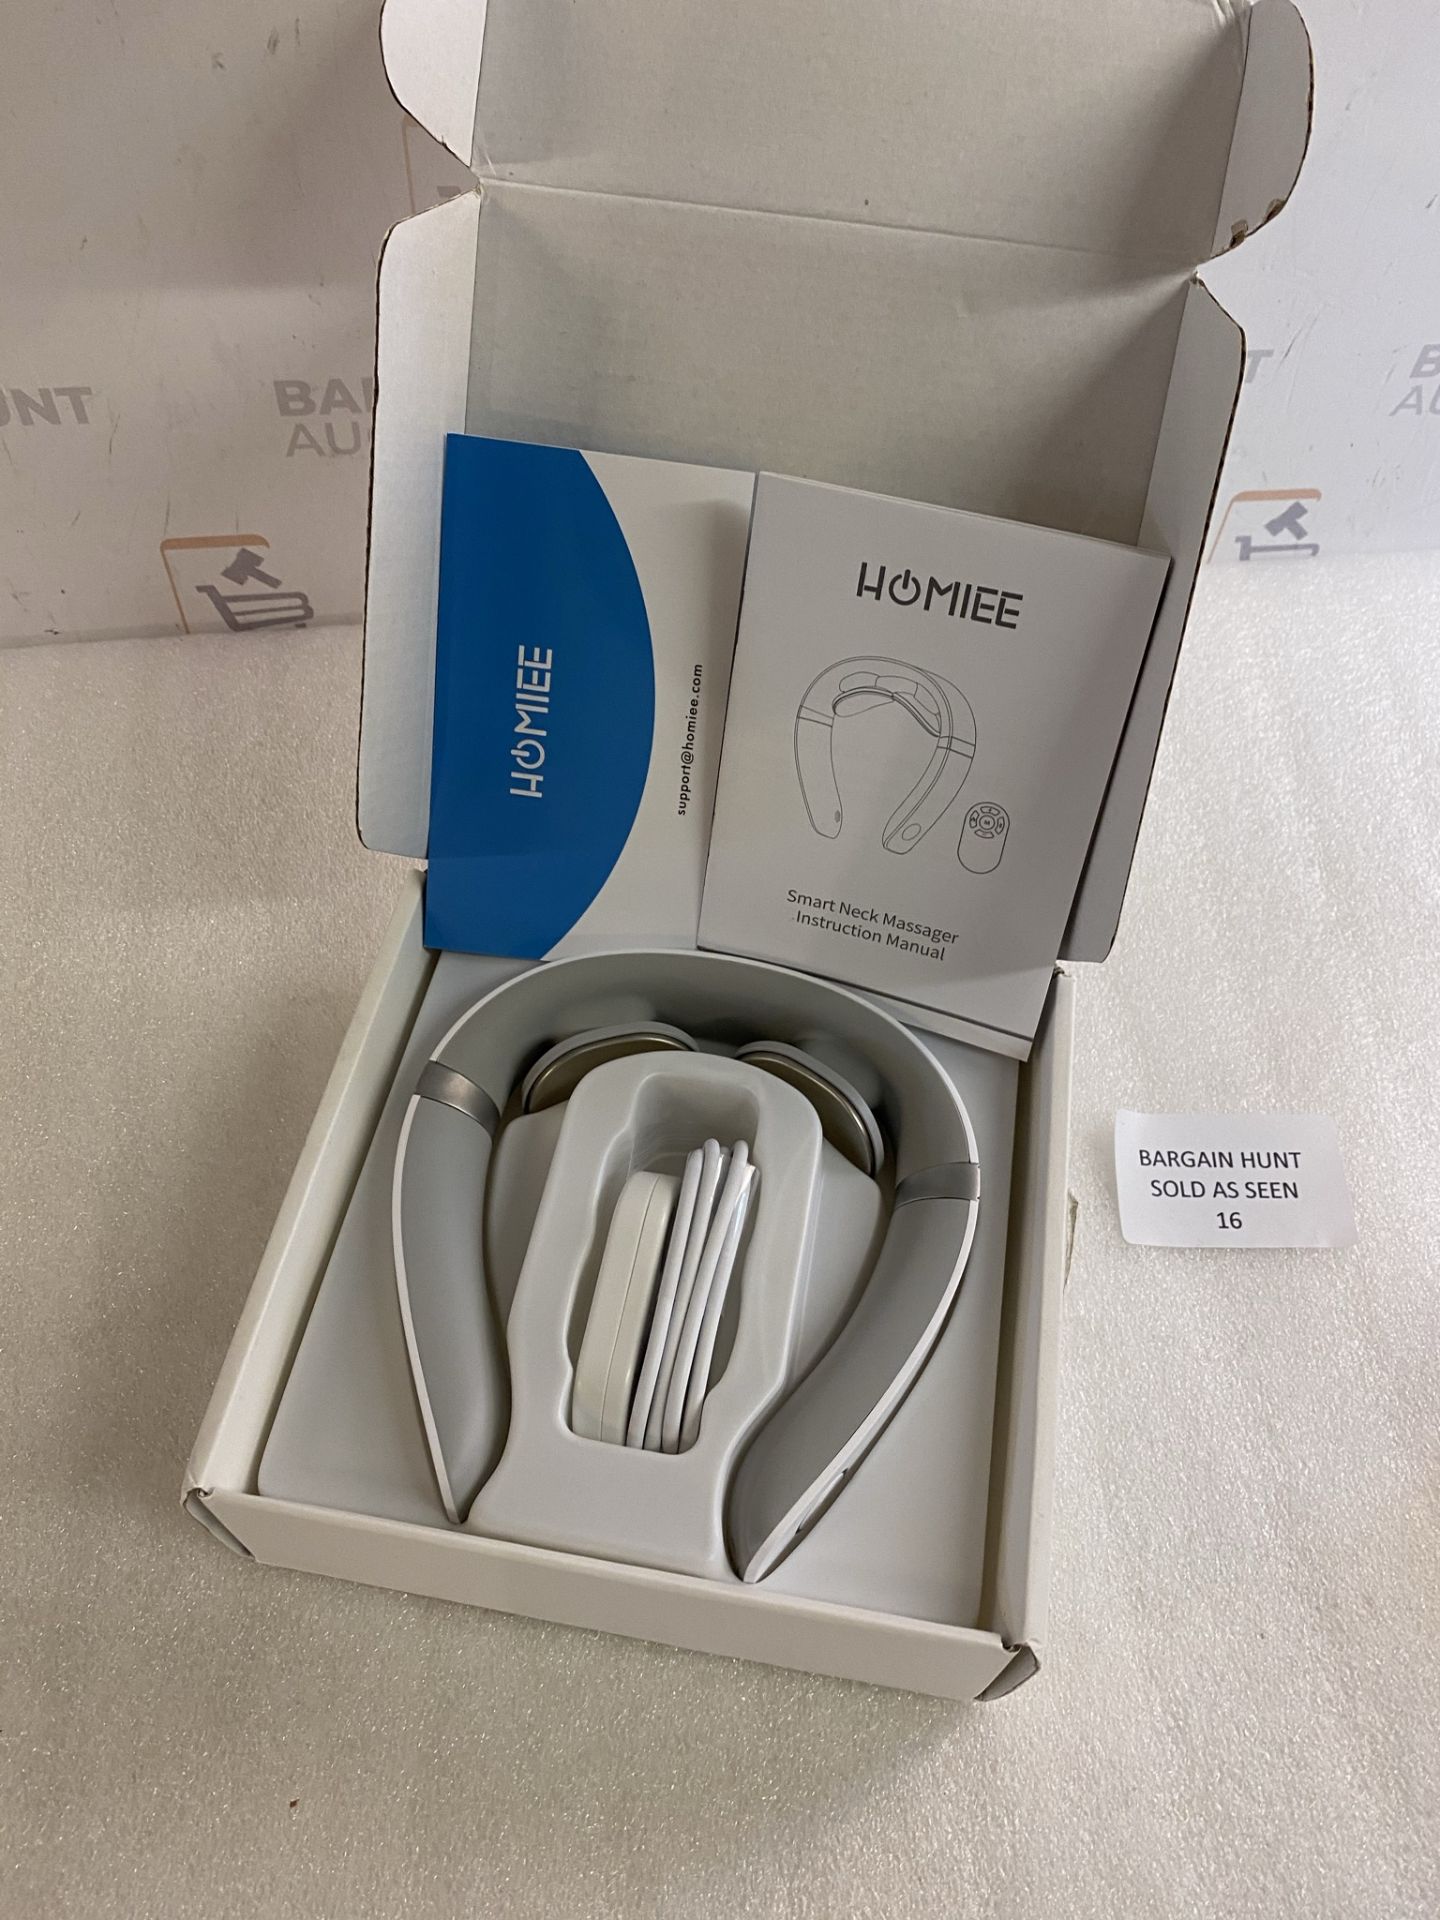 HOMIEE Smart Neck Massager with Heat, Electromagnetic Pulse Neck Massager - Image 2 of 2